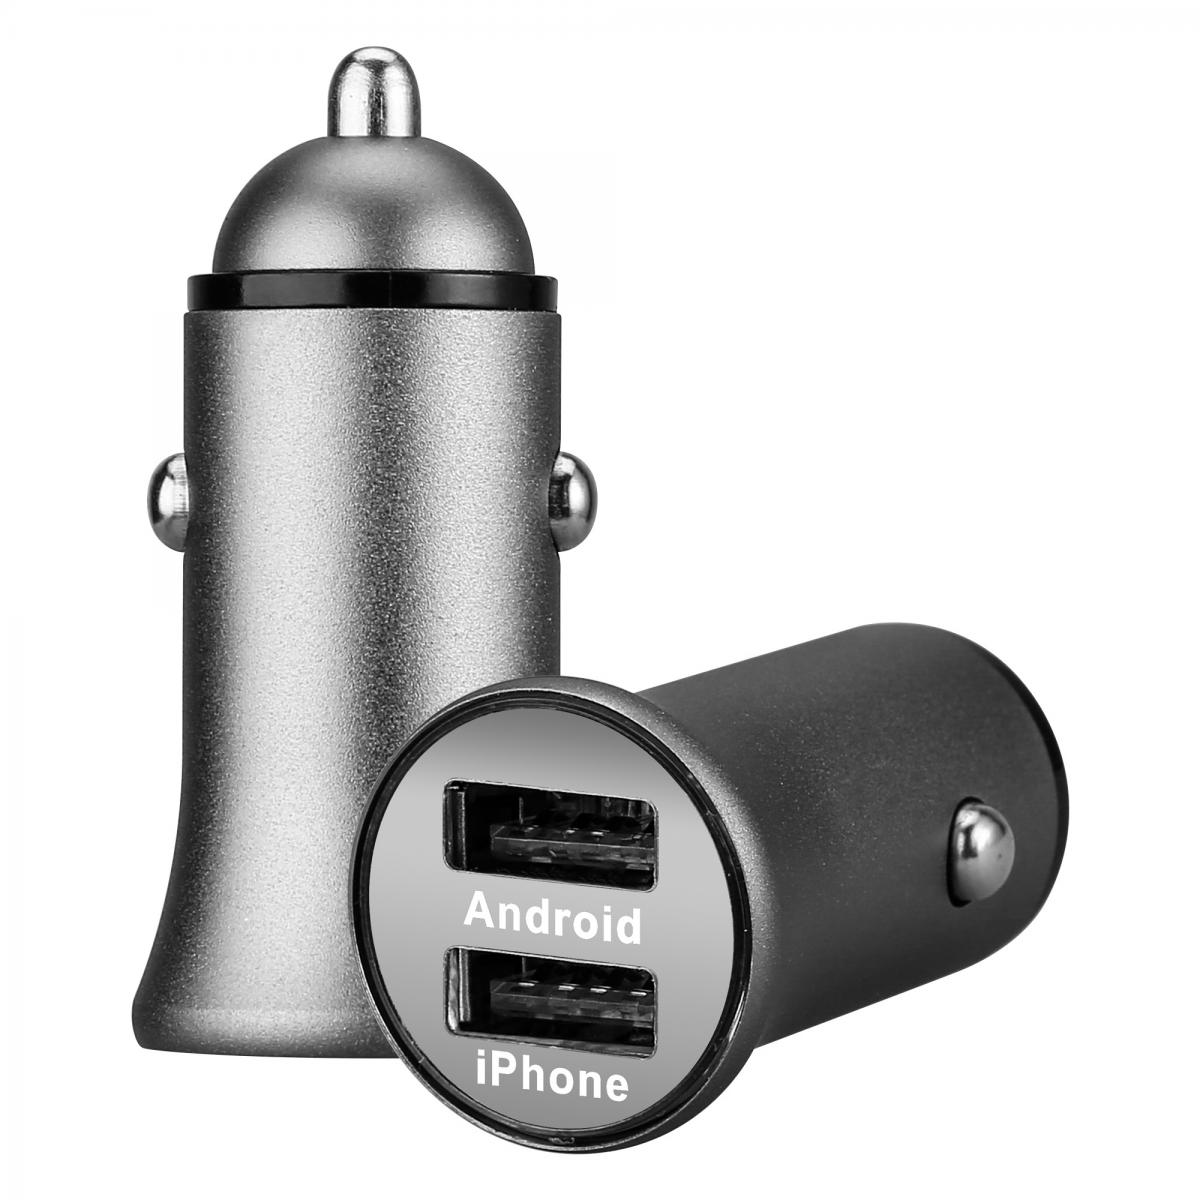 Shot - Double Adaptateur Metal Allume Cigare USB pour Smartphone HUAWEI Y6s Prise Double 2 Ports Voiture Chargeur - Chargeur Voiture 12V